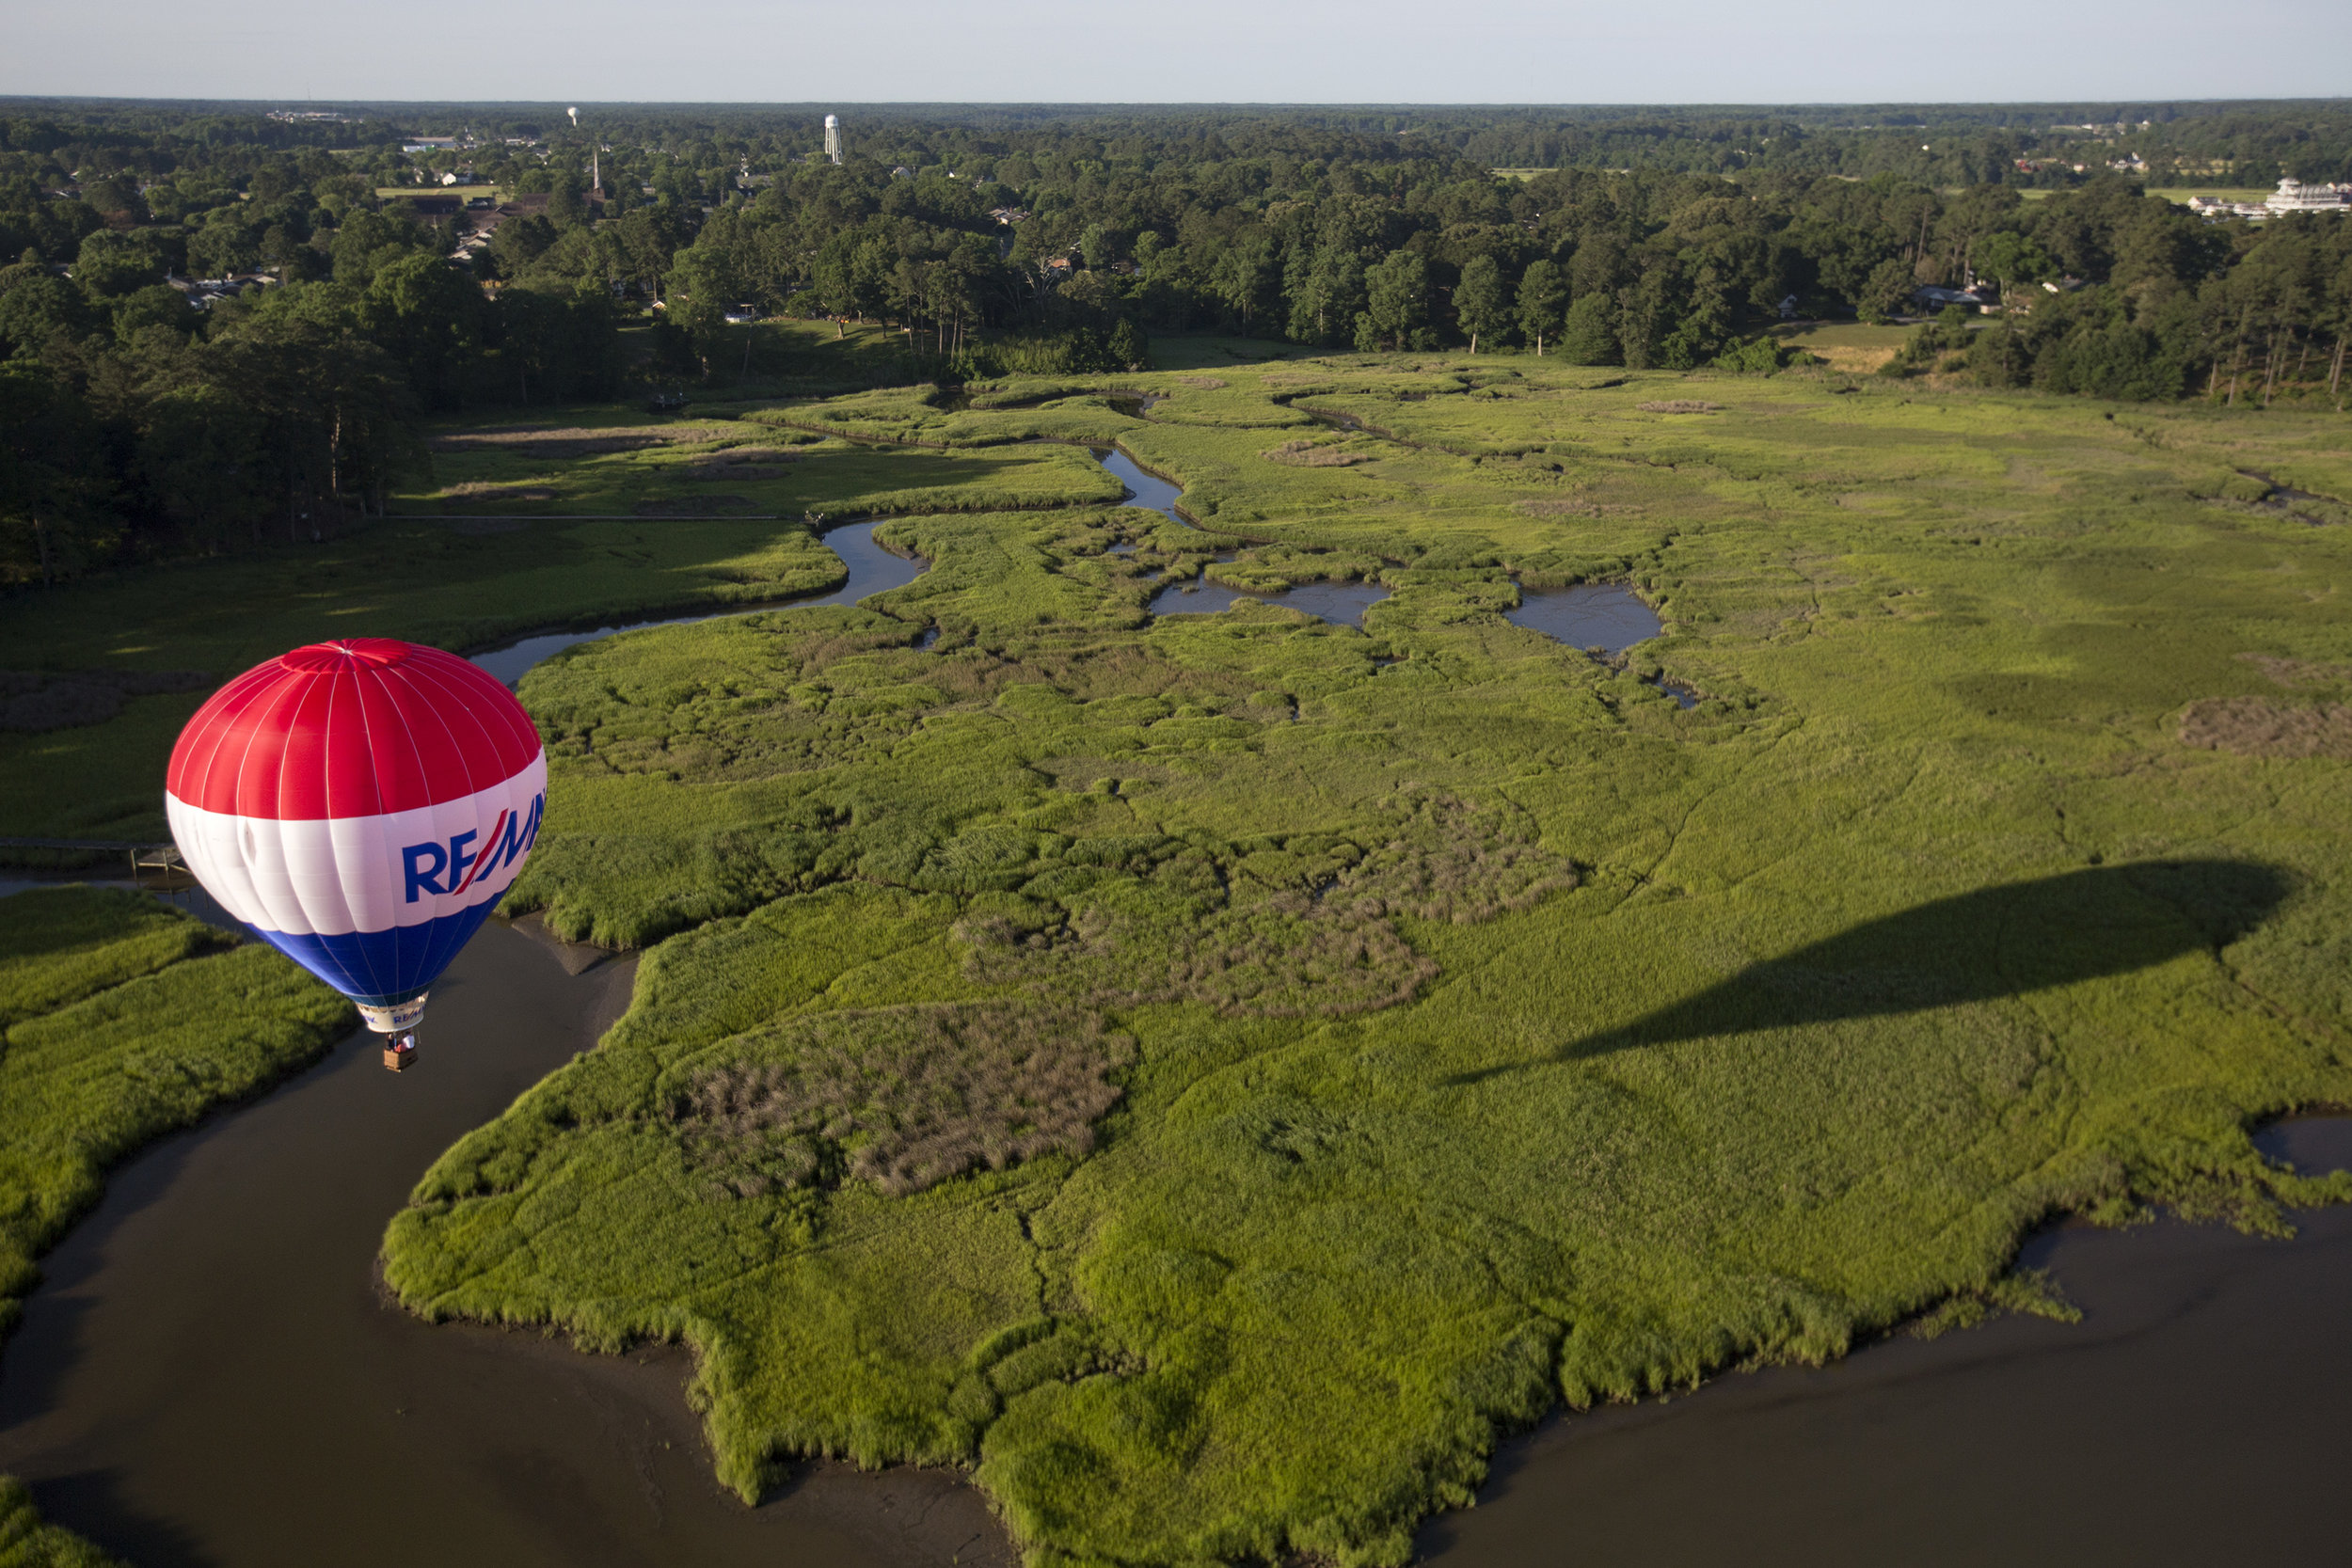  A RE/MAX balloon flies over Smithfield, VA, during an early morning flight on June 4, 2019. 